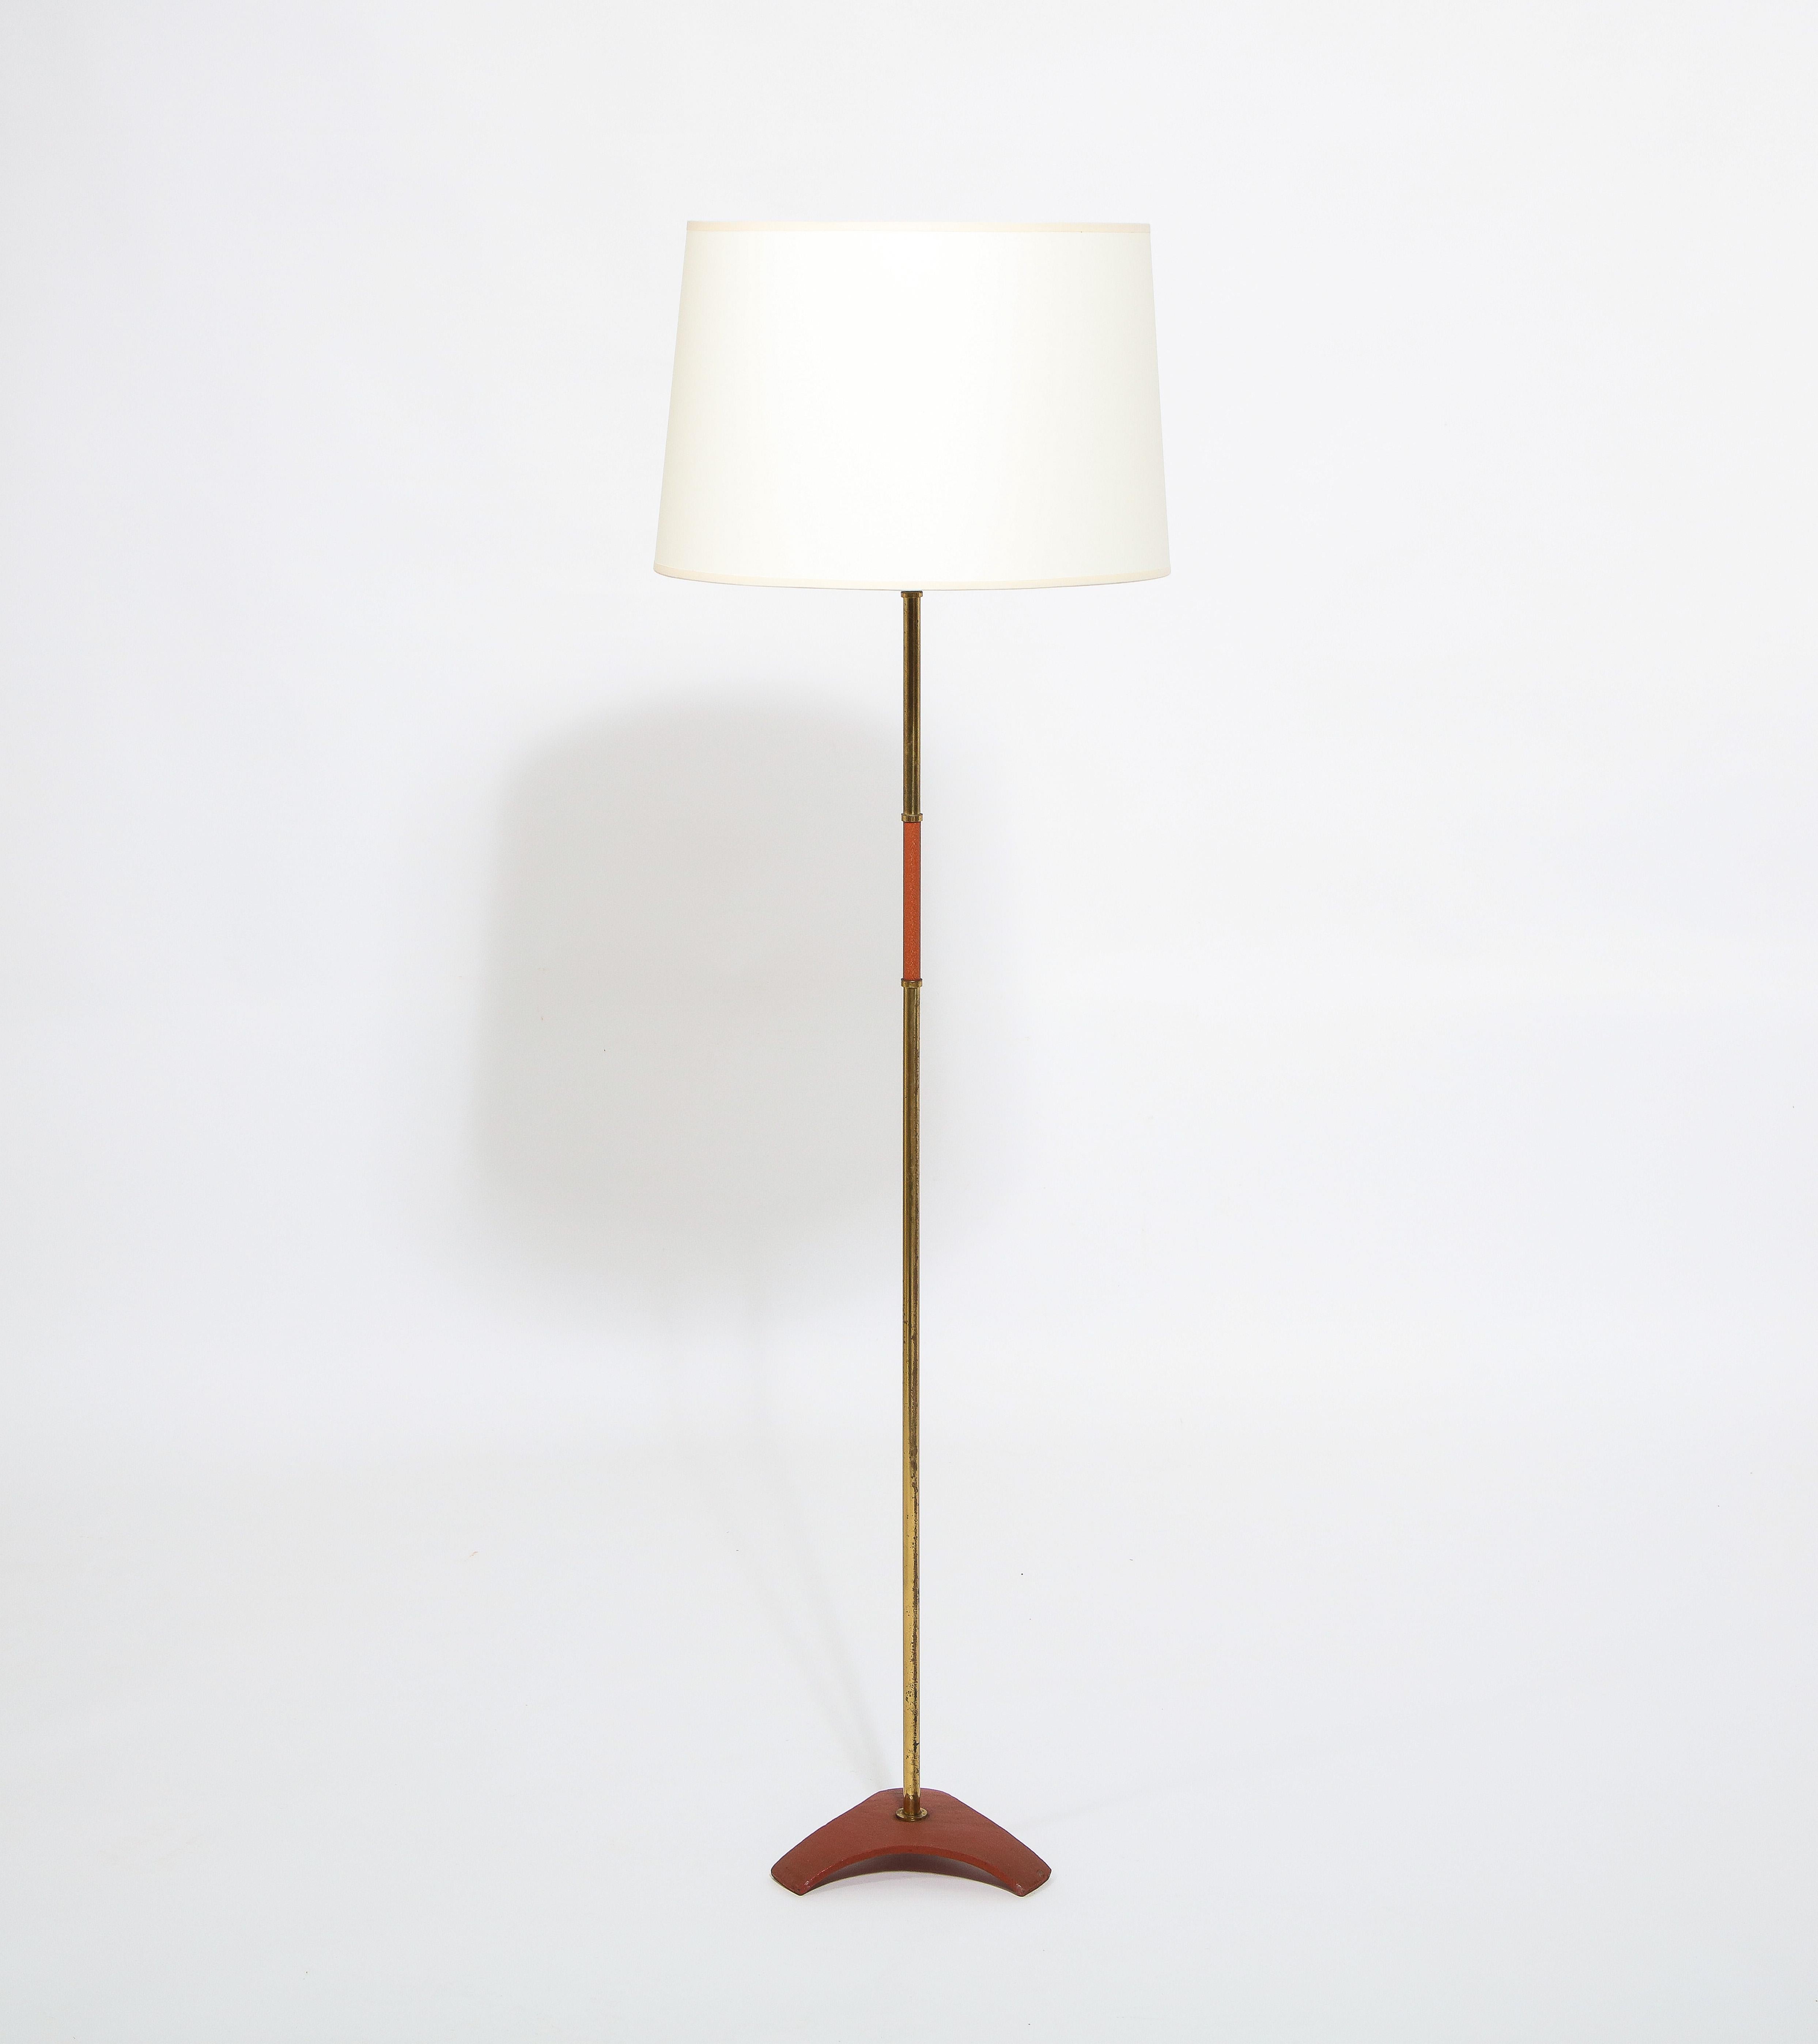 Minimal floor lamp in patinated brass with textured red enamel accents on a domed tripod base. Shade is for photographic purposes.